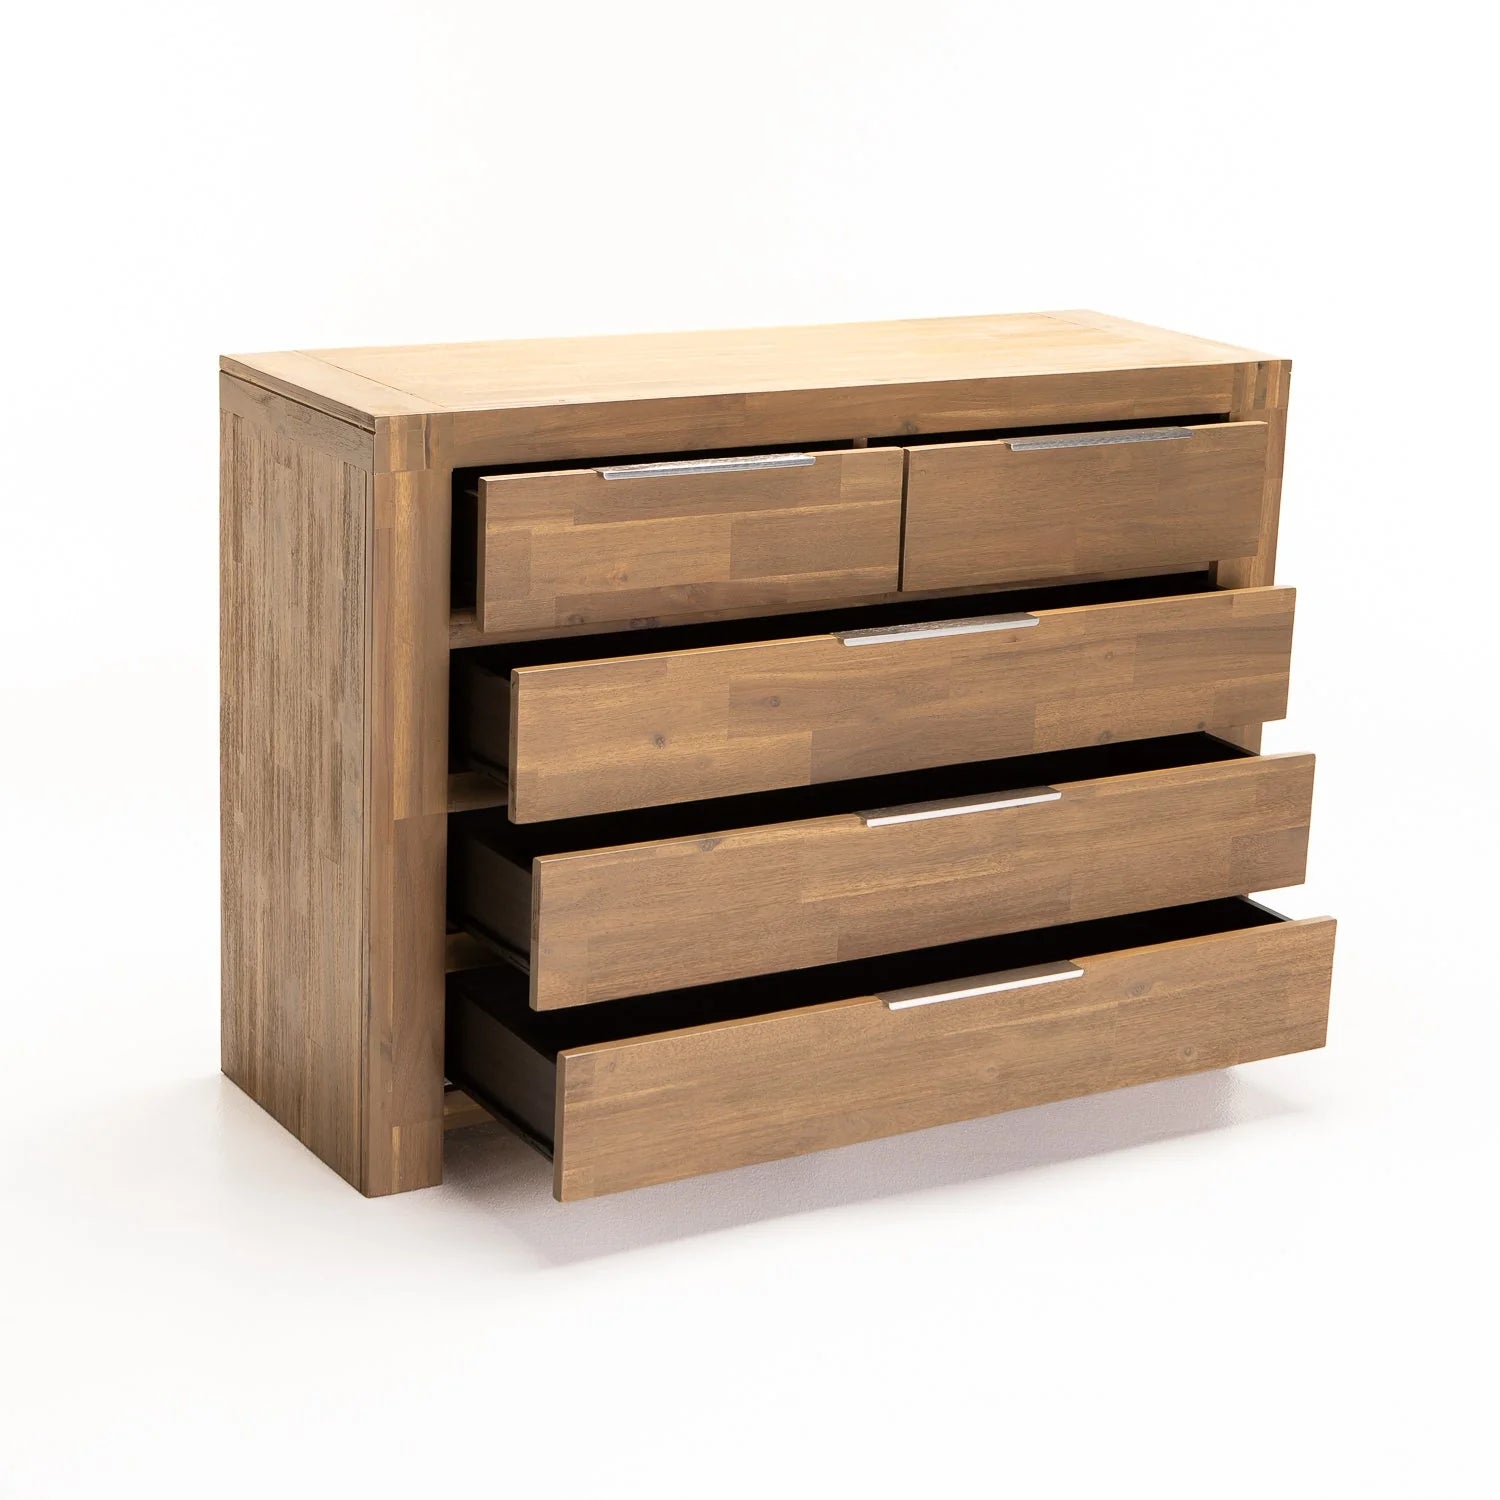 Stacey 5 Drawer Chest of Drawers (120 cm)